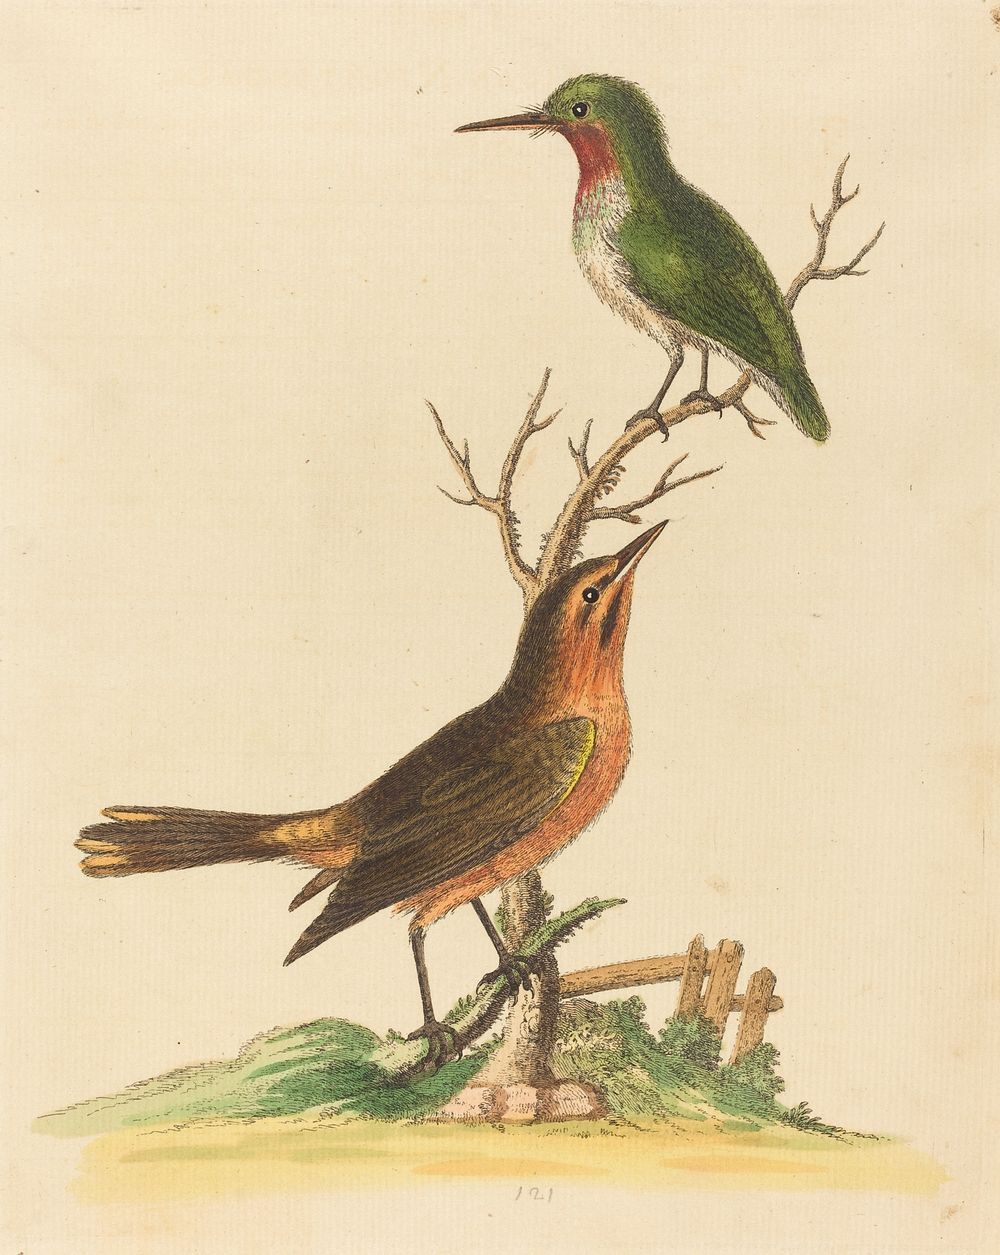 Green Bird with Red Throat and Brown and Orange Bird (1743-1751) print in high resolution by George Edwards.  